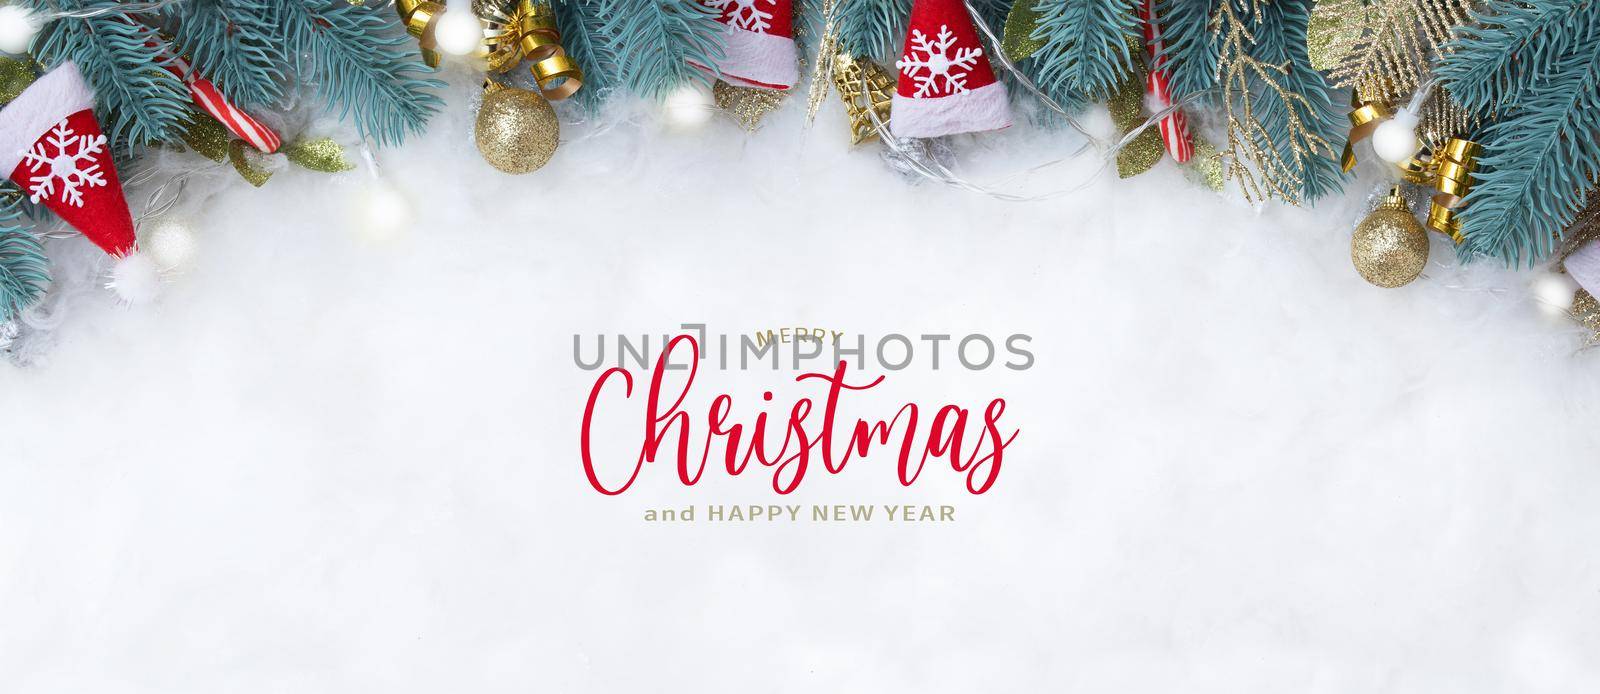 Banner with Merry Christmas text and fir branches Christmas decorations flat lay on a snowy background